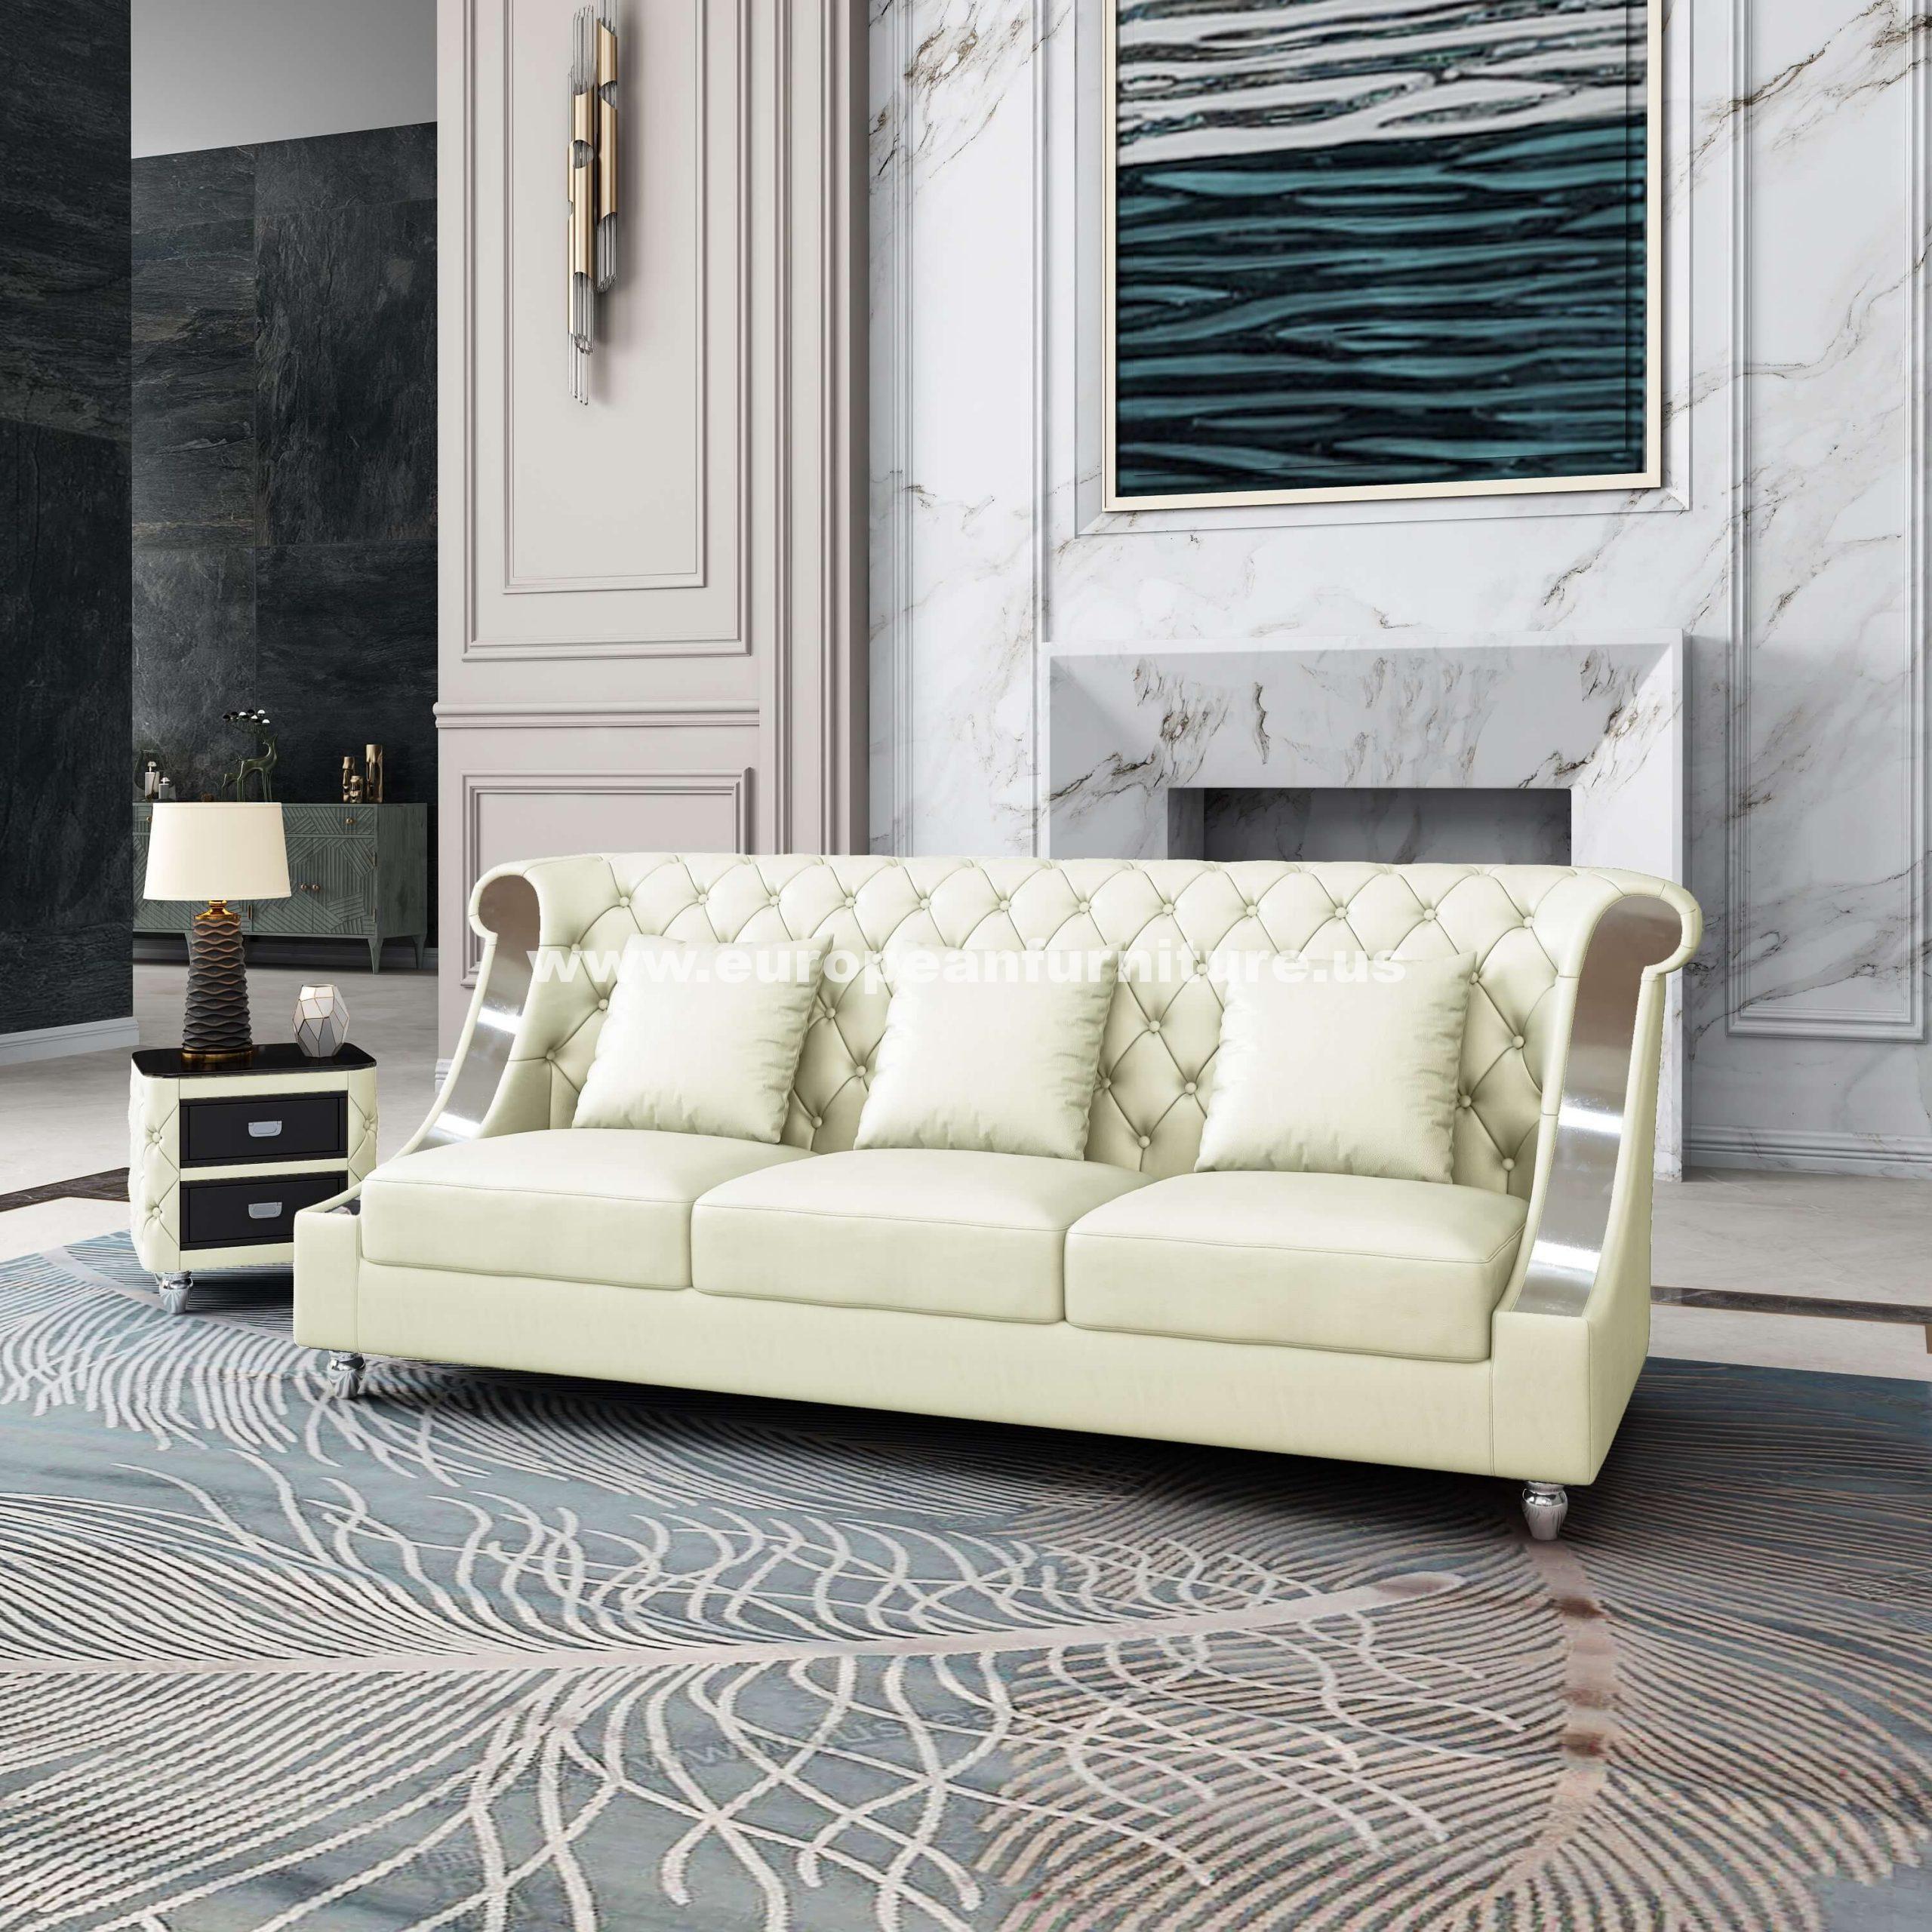 Contemporary, Modern Sofa MAYFAIR EF-90280-S in Off-White Leather